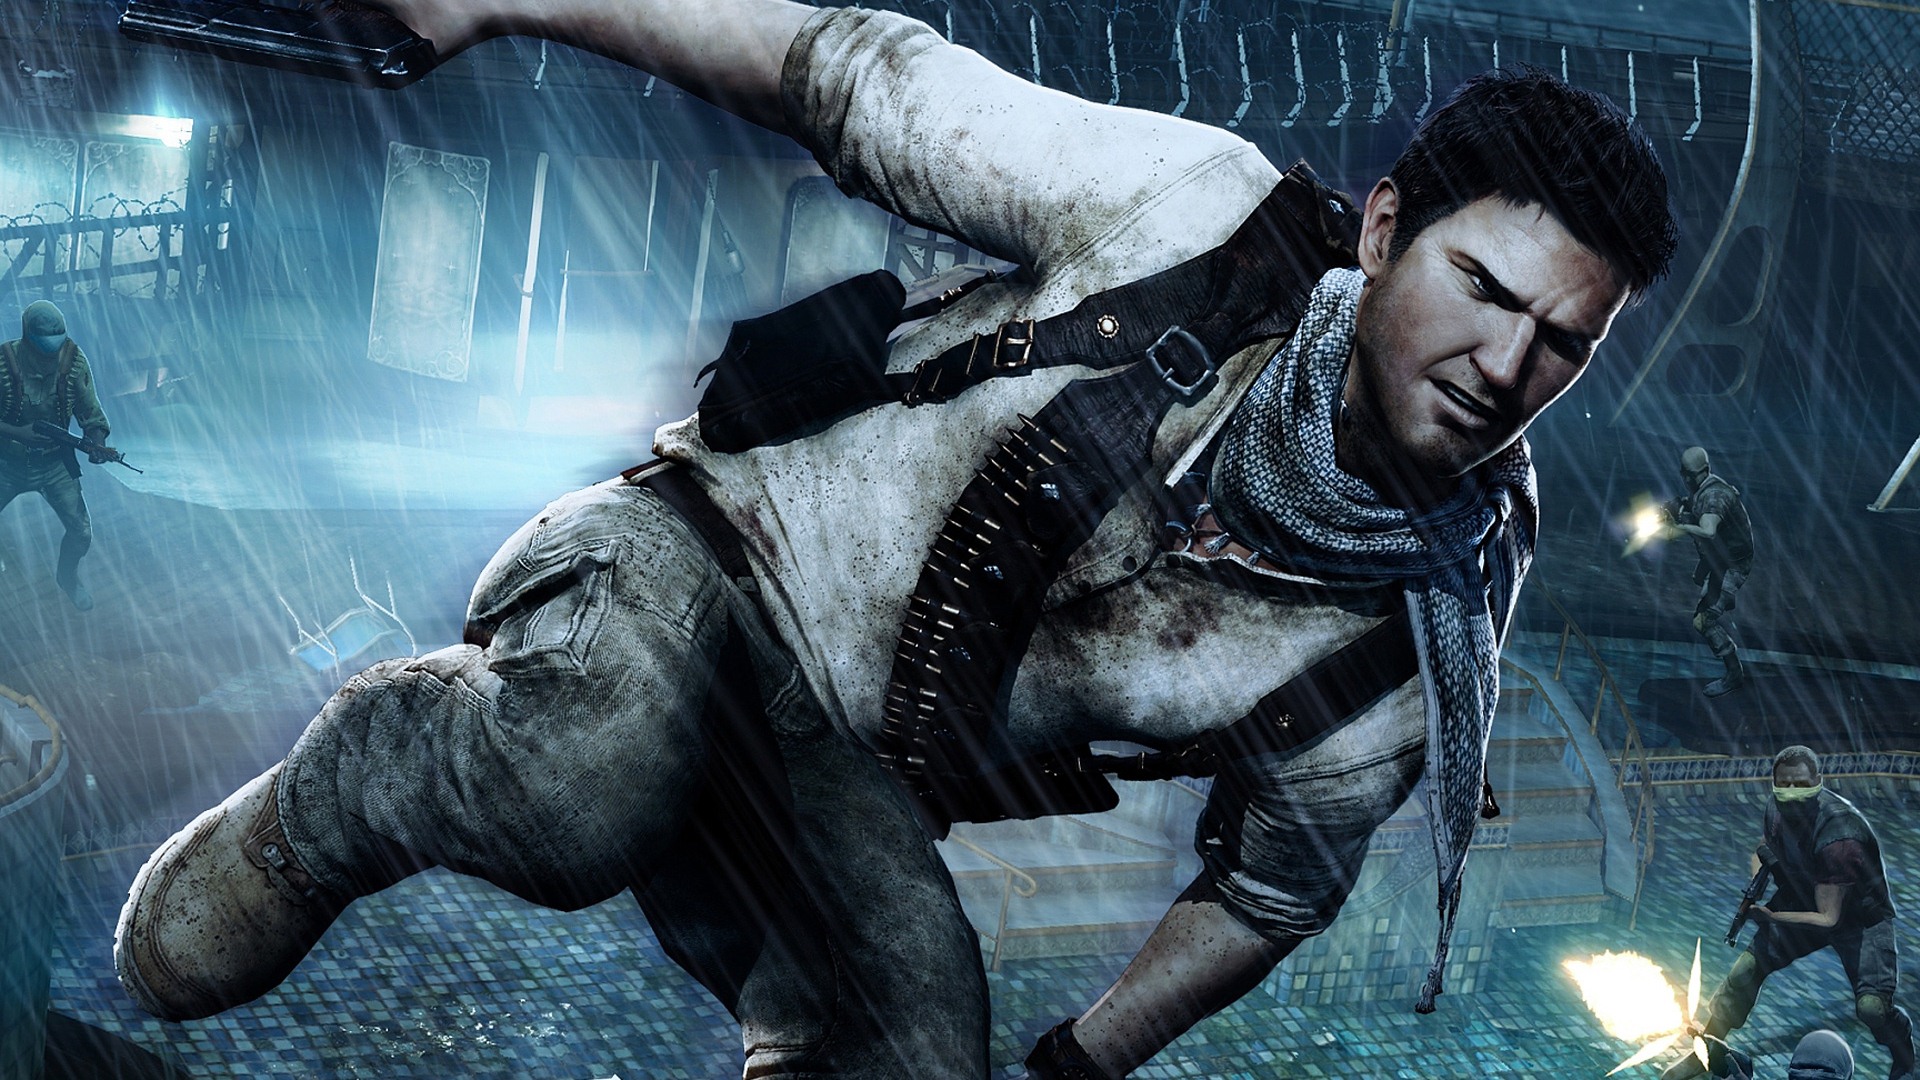 Uncharted 3: Drake's Deception HD wallpapers #11 - 1920x1080